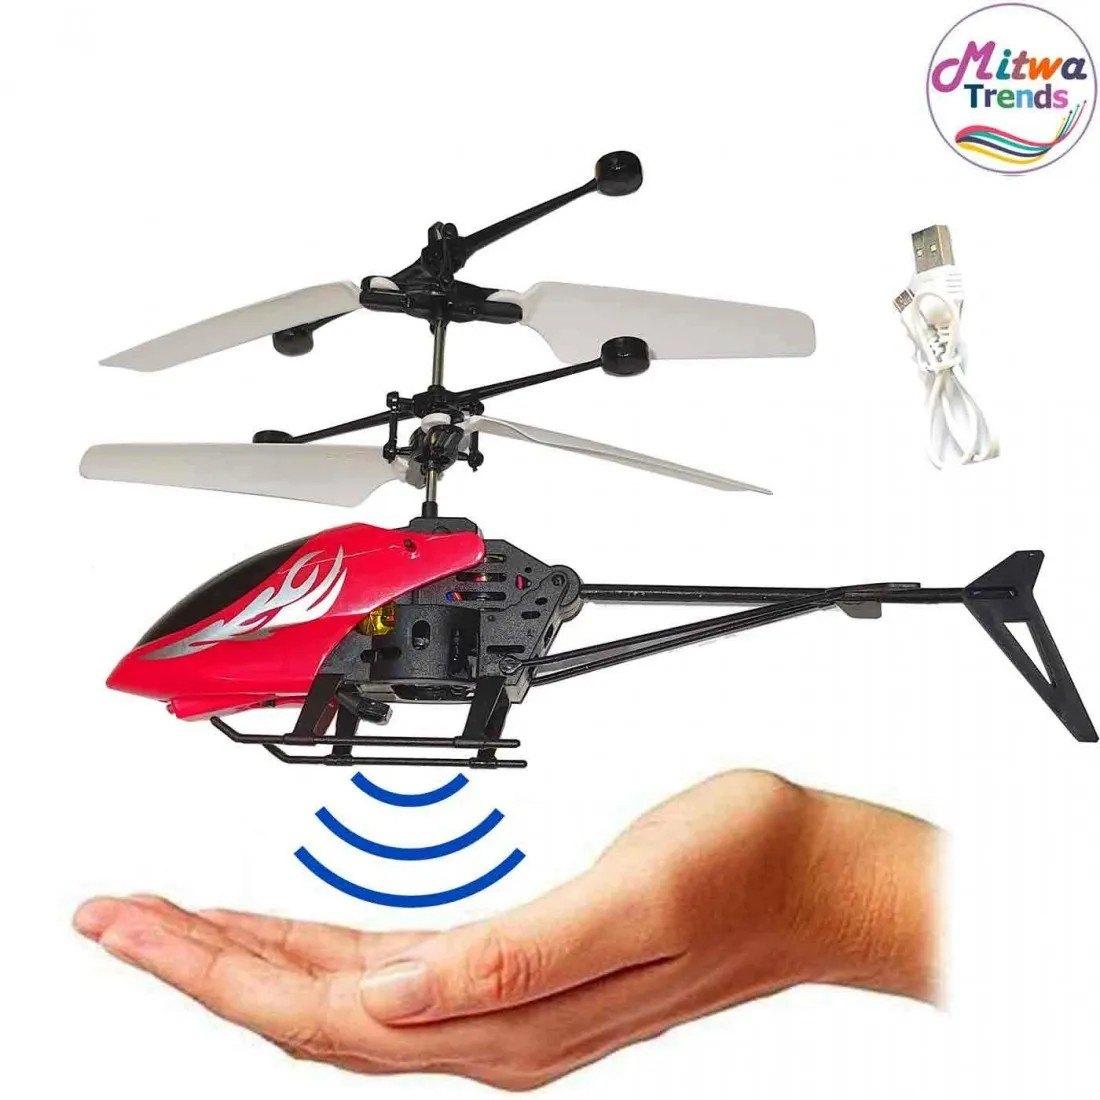 Remote Control Helicopter Rs 100: Tips for Flying the RS 100